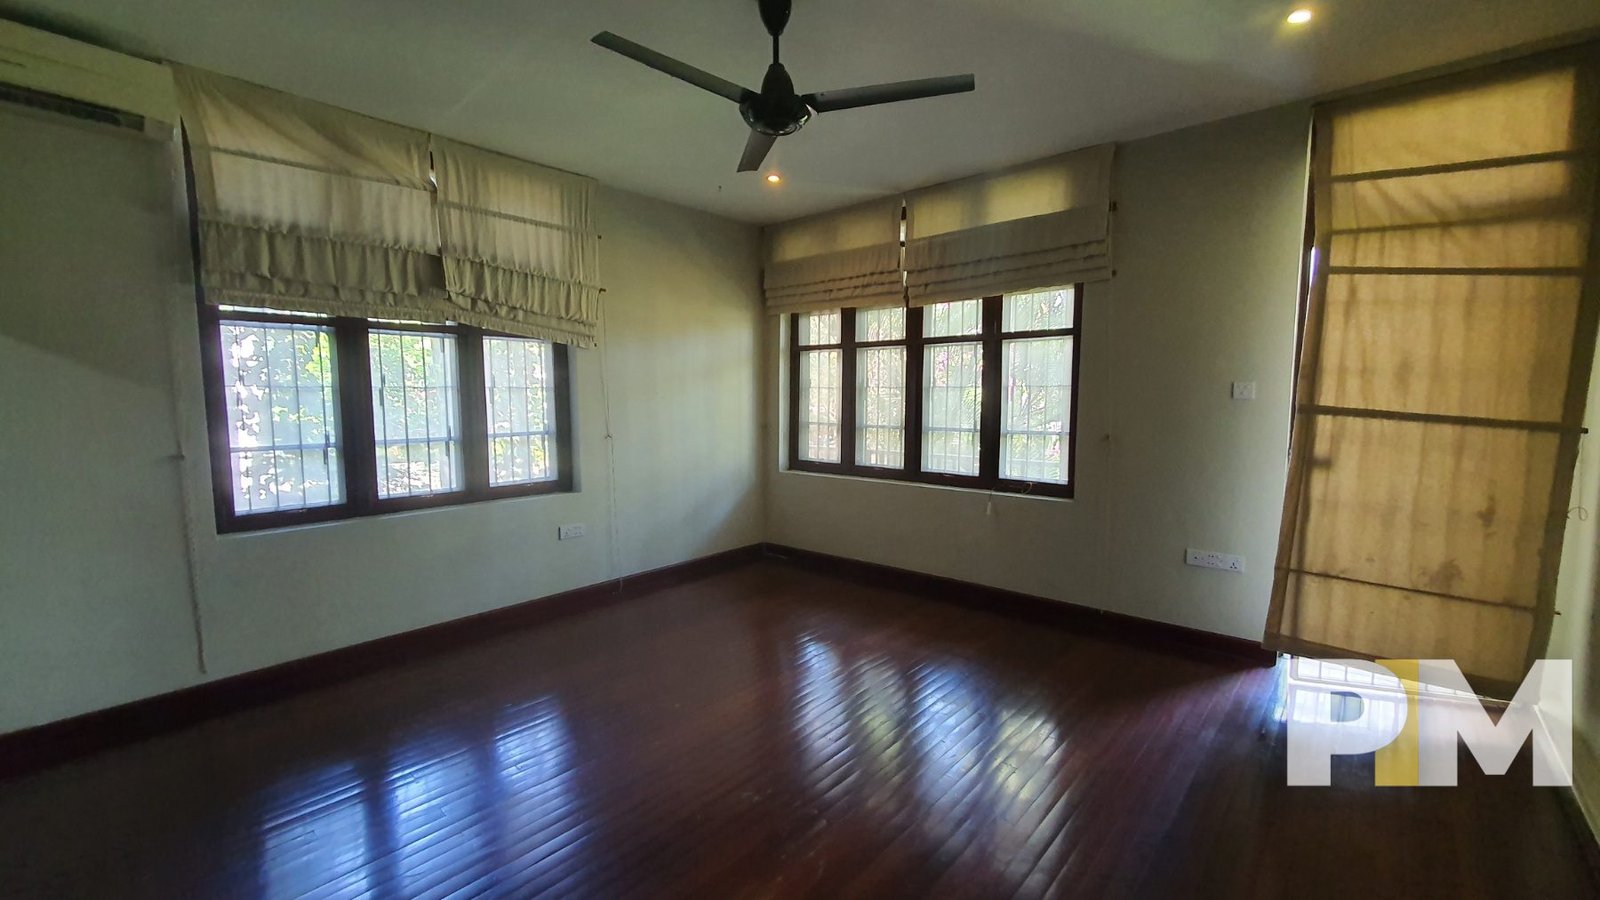 room with ceiling fan - Yangon Property